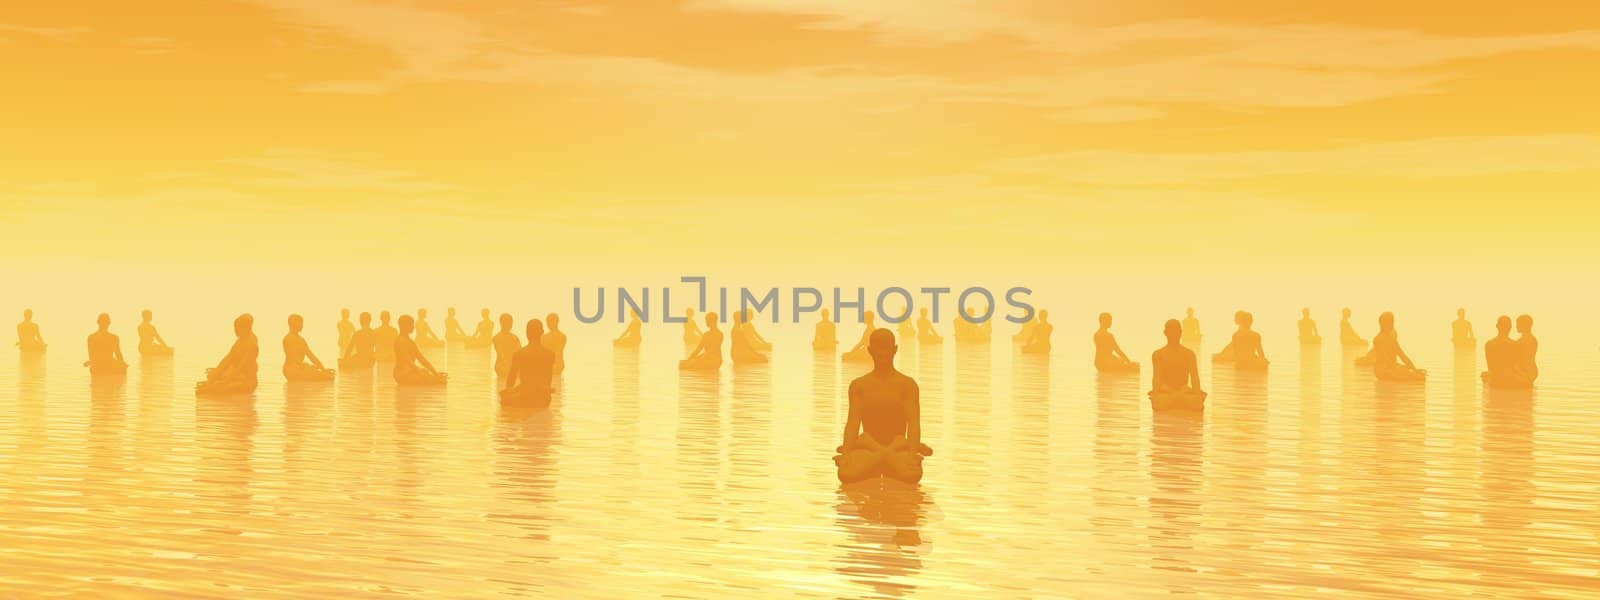 Many human beings meditating together by sunset